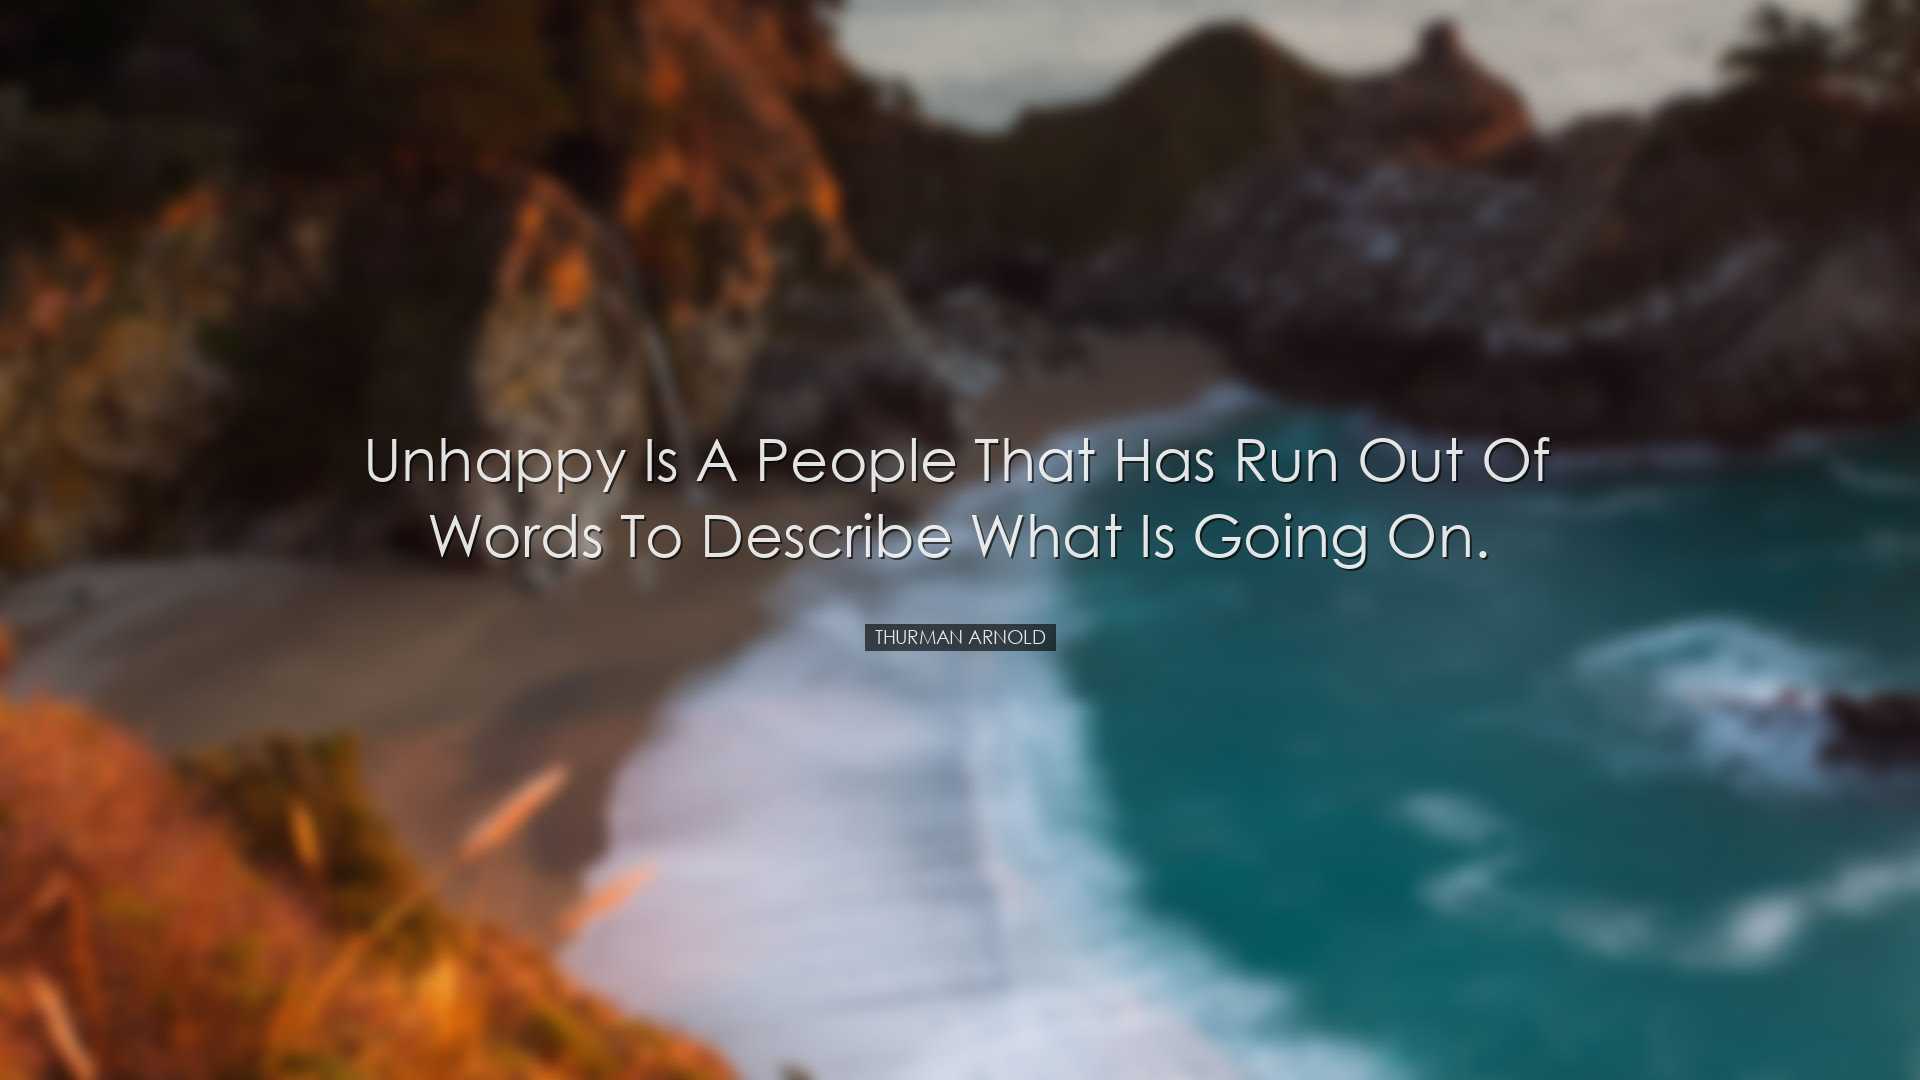 Unhappy is a people that has run out of words to describe what is